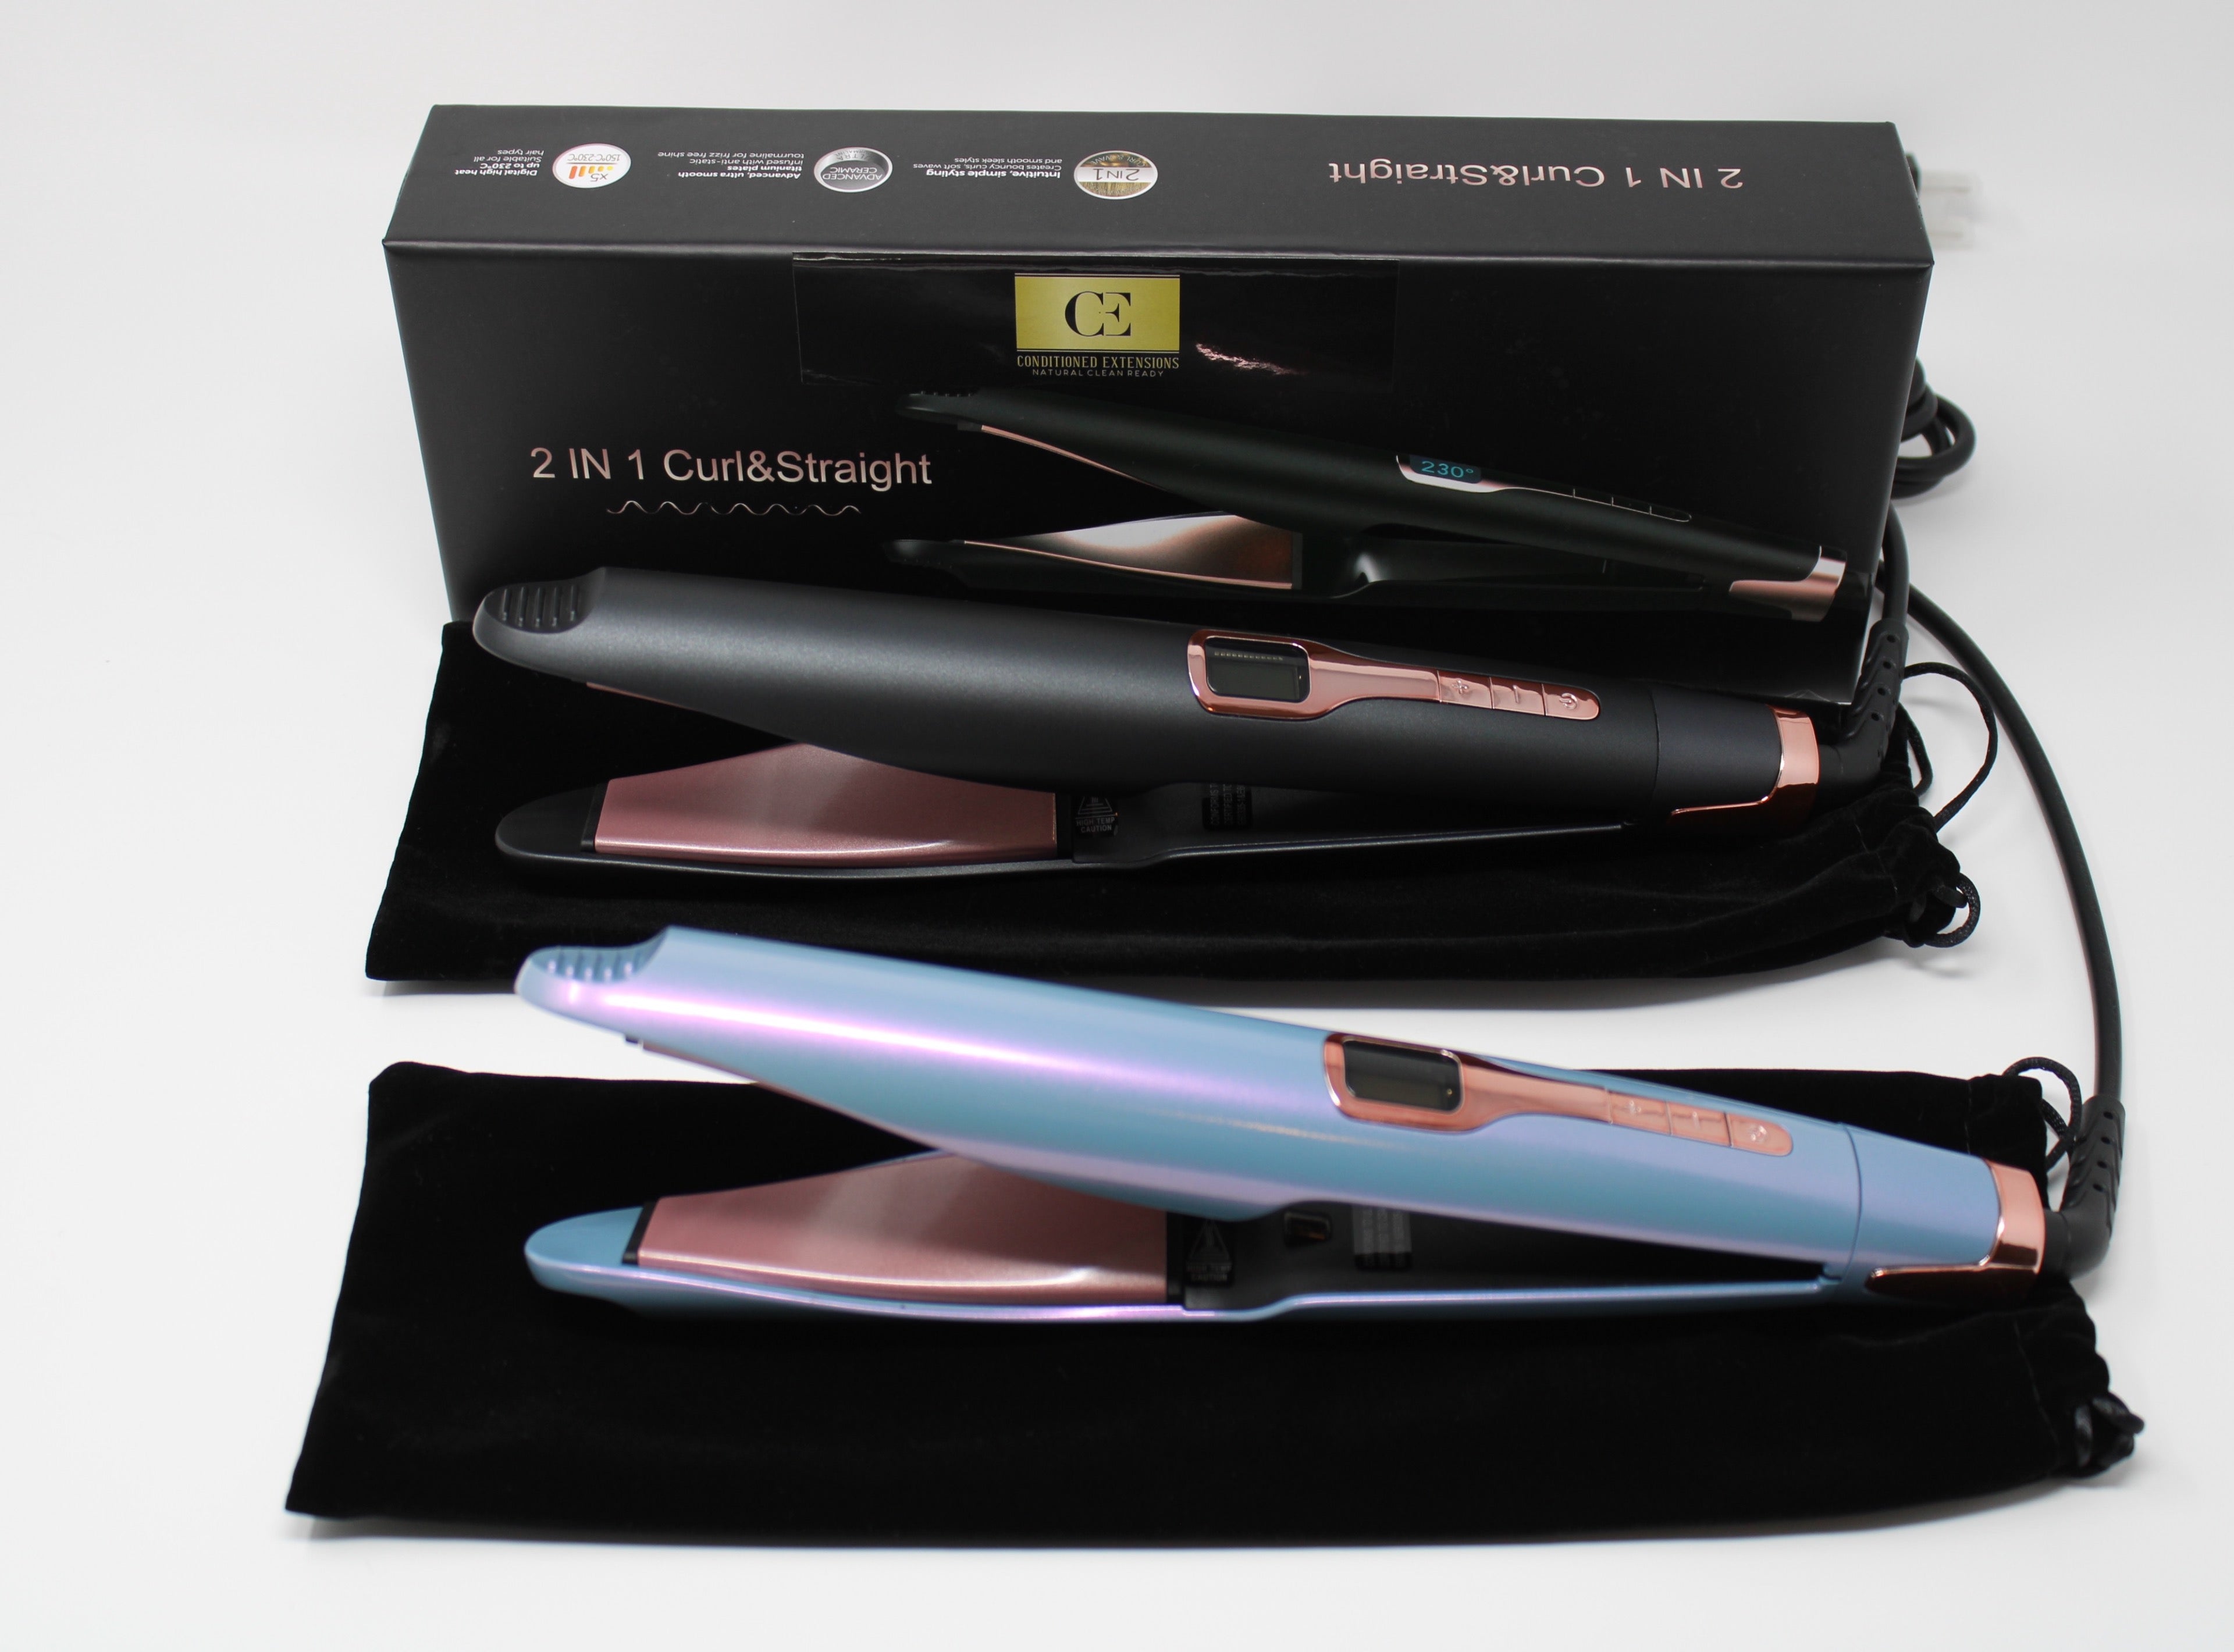 https://conditionedextensions.com/products/ce-2-in-1-curl-straightener